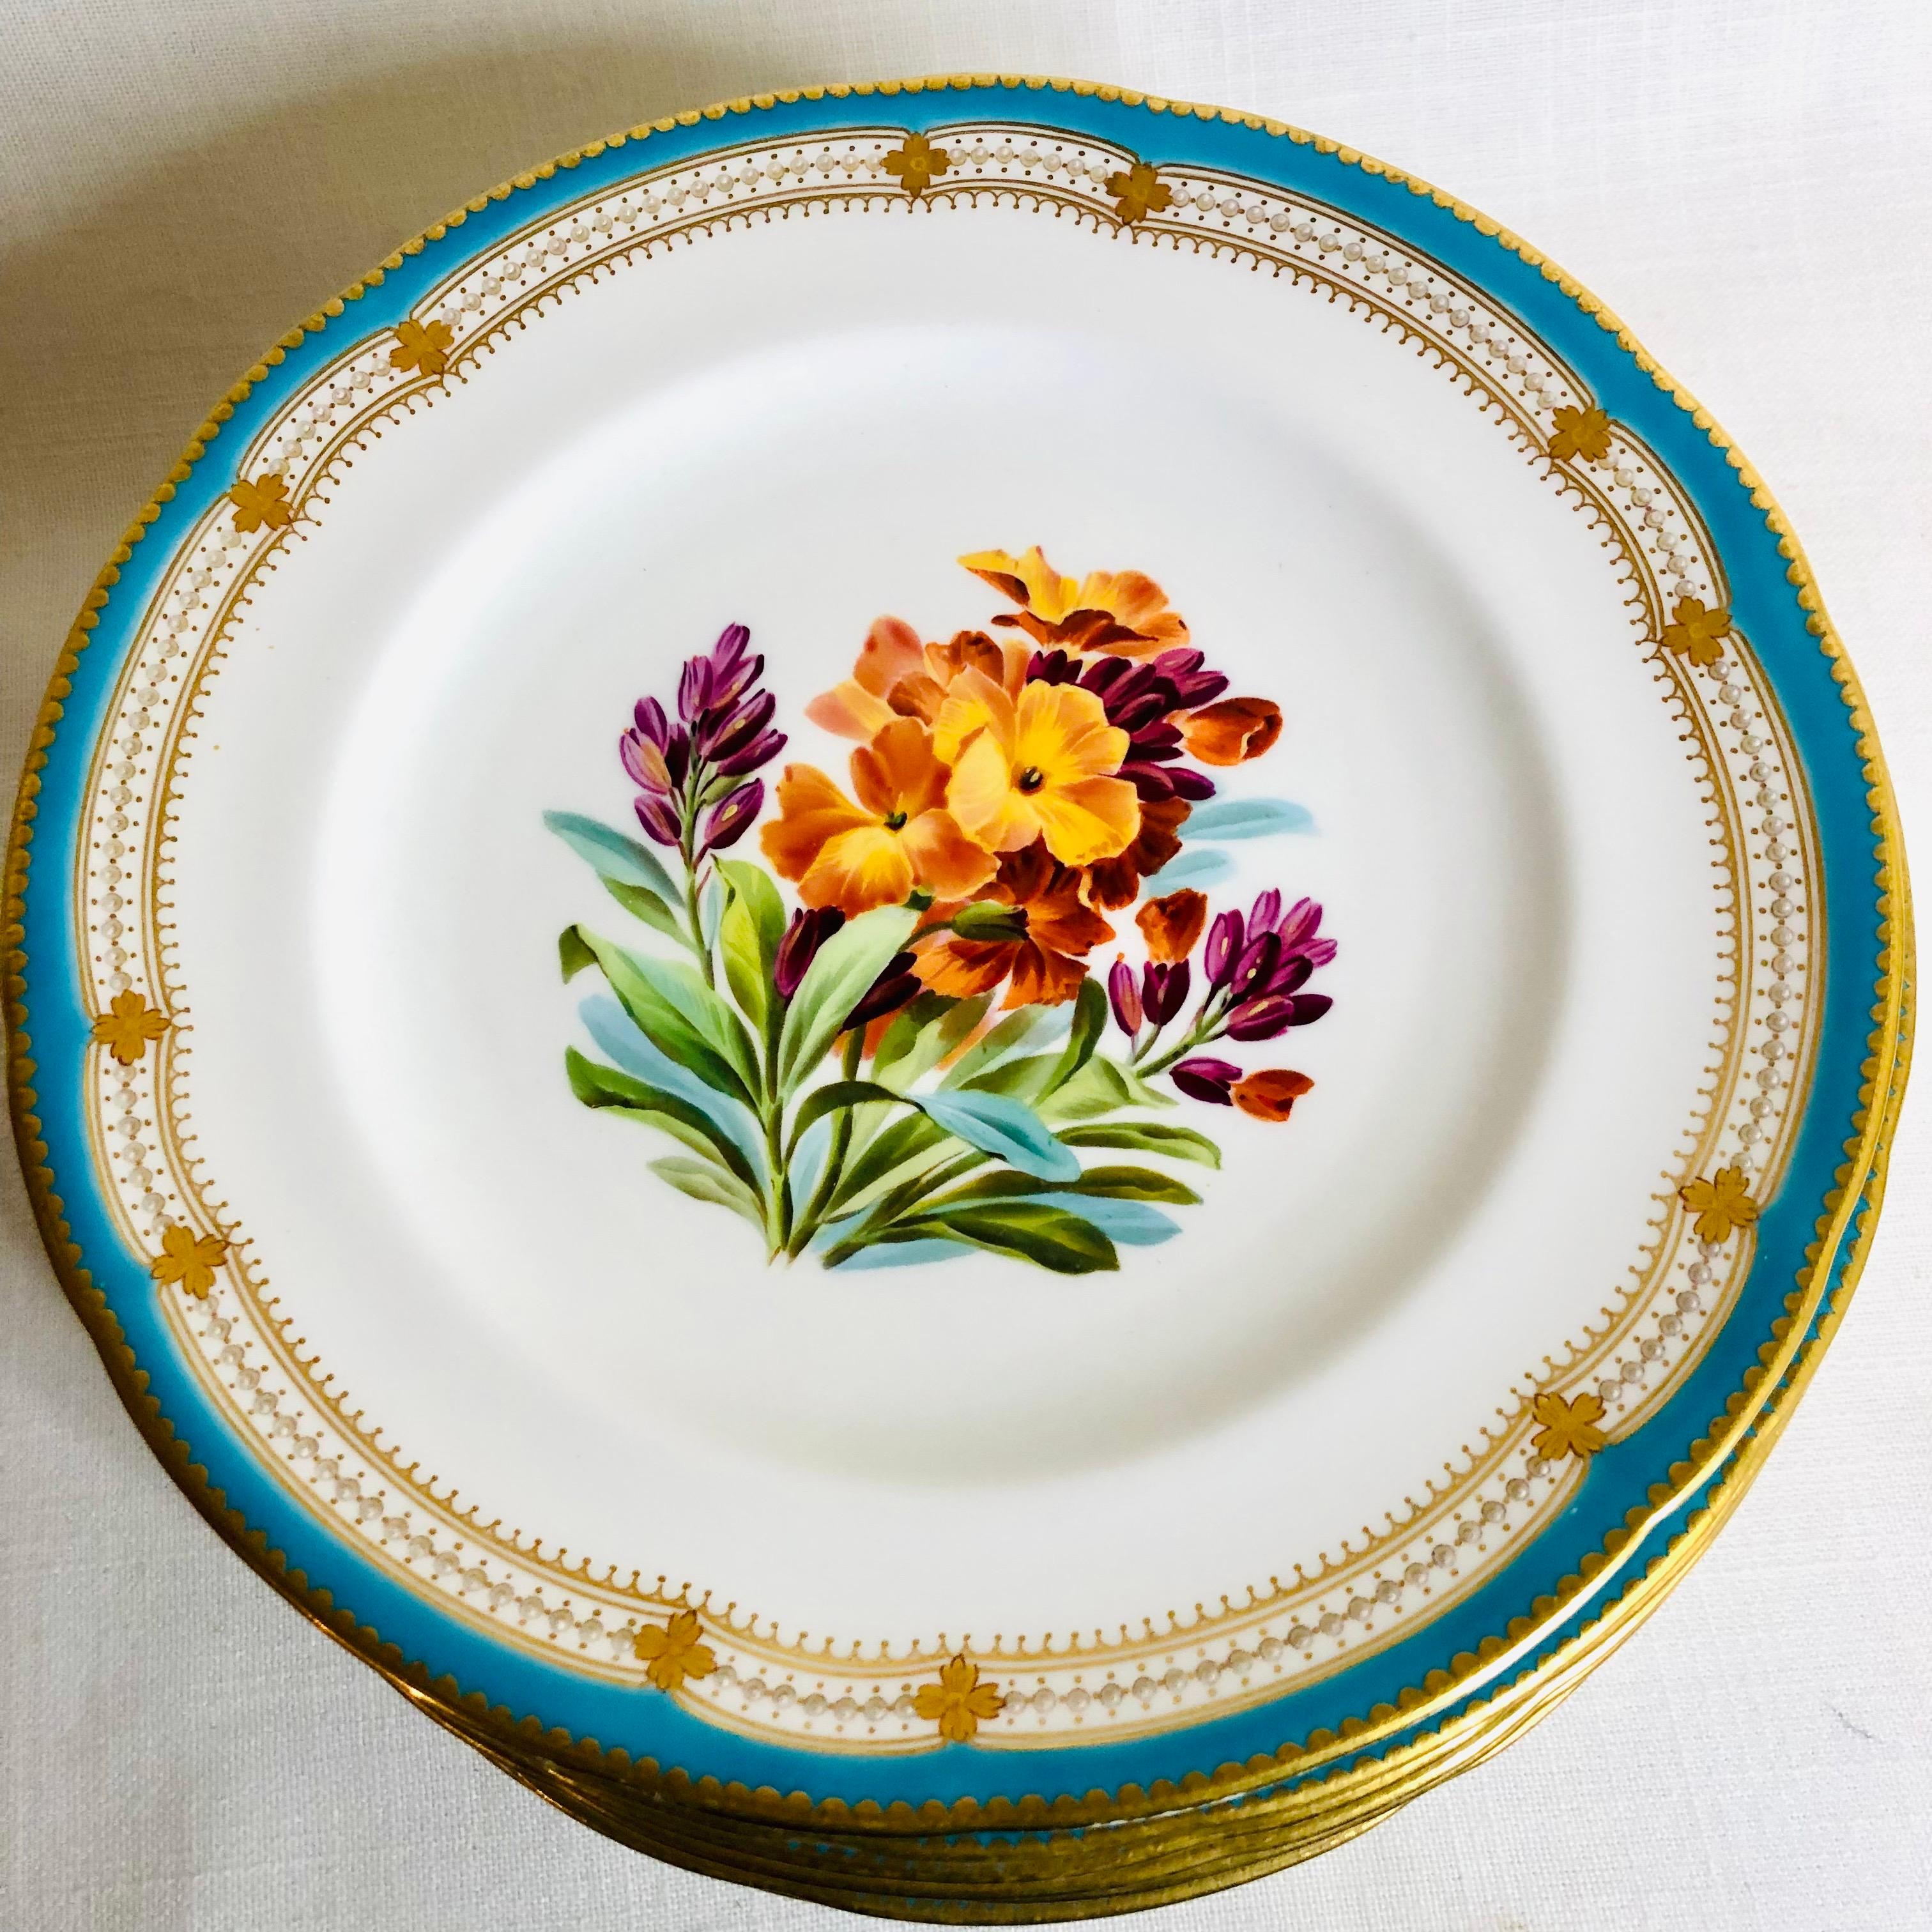 Set of 16 Rare Minton Plates Each Hand-Painted with a Different Flower Bouquet 2